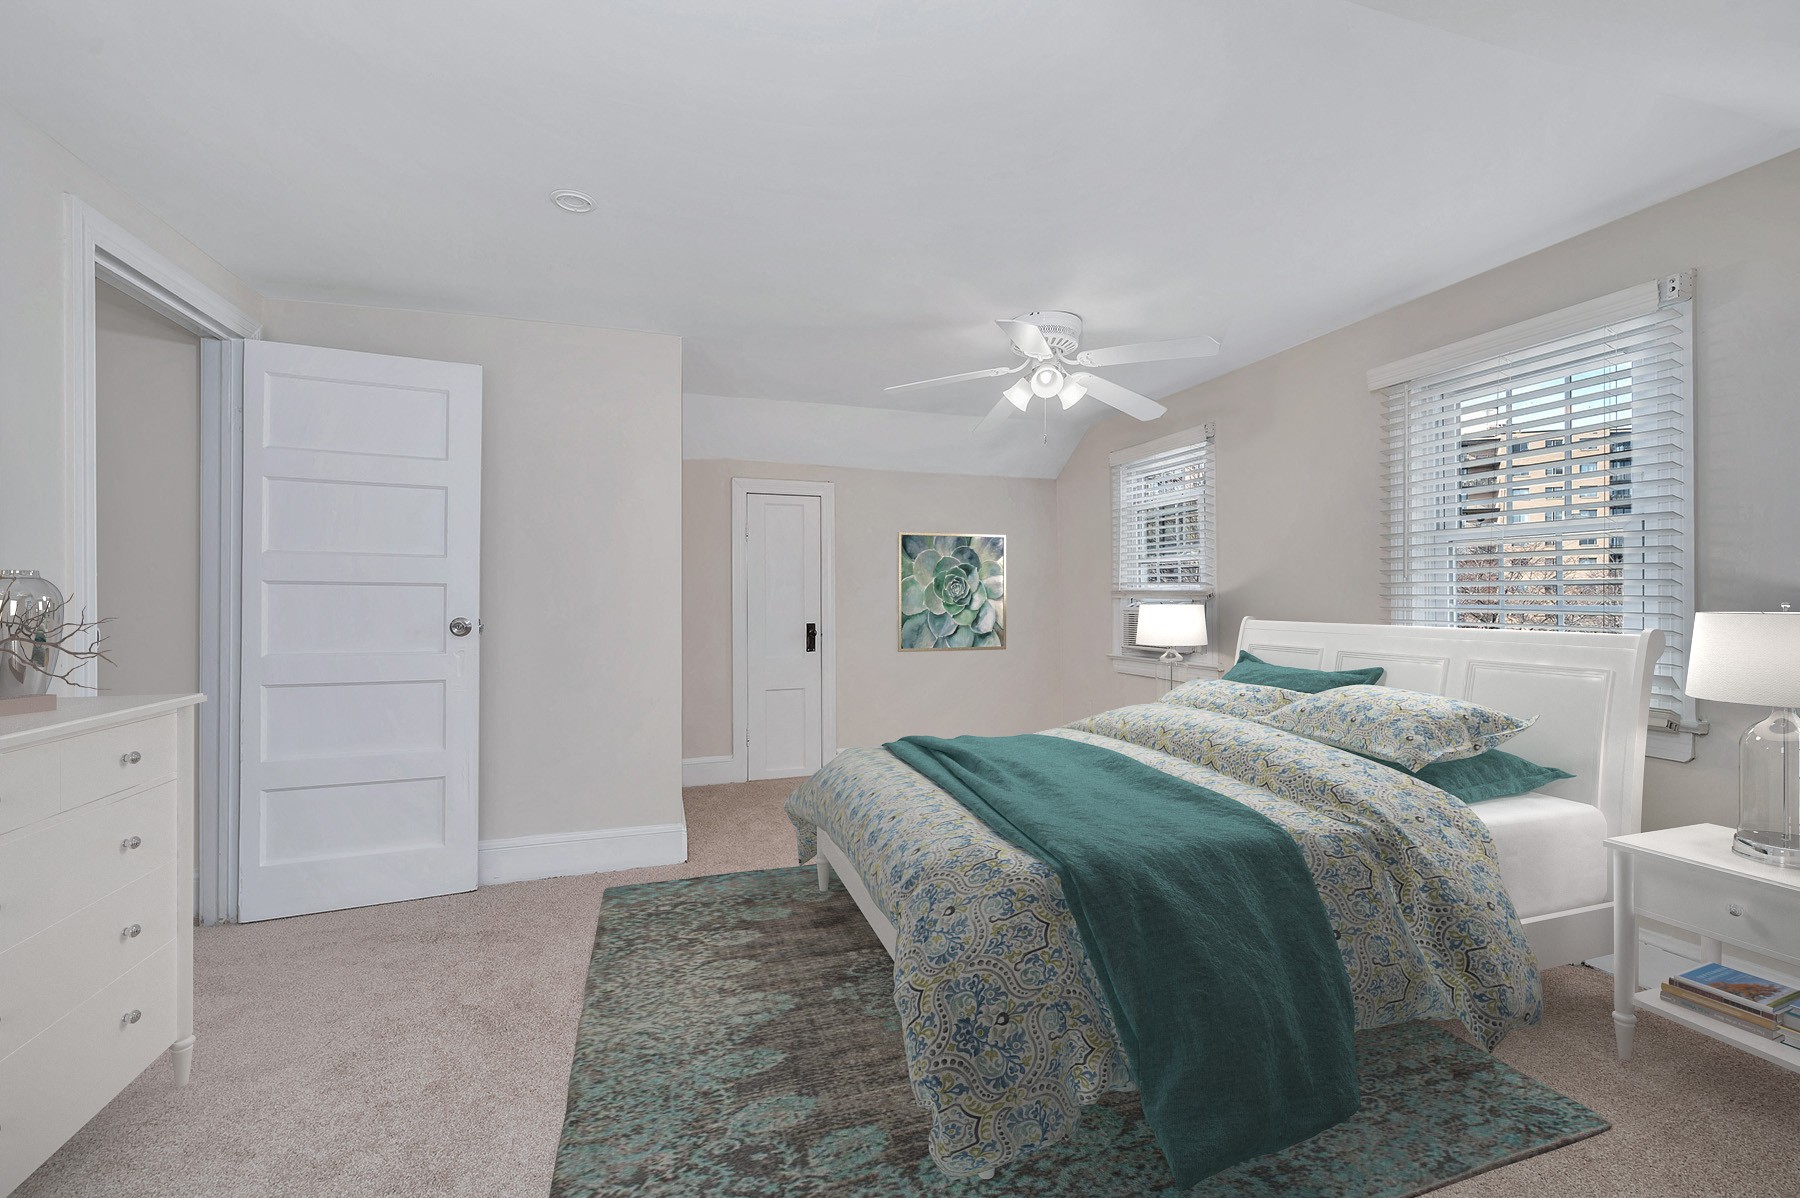 King size bedroom with ceiling fan